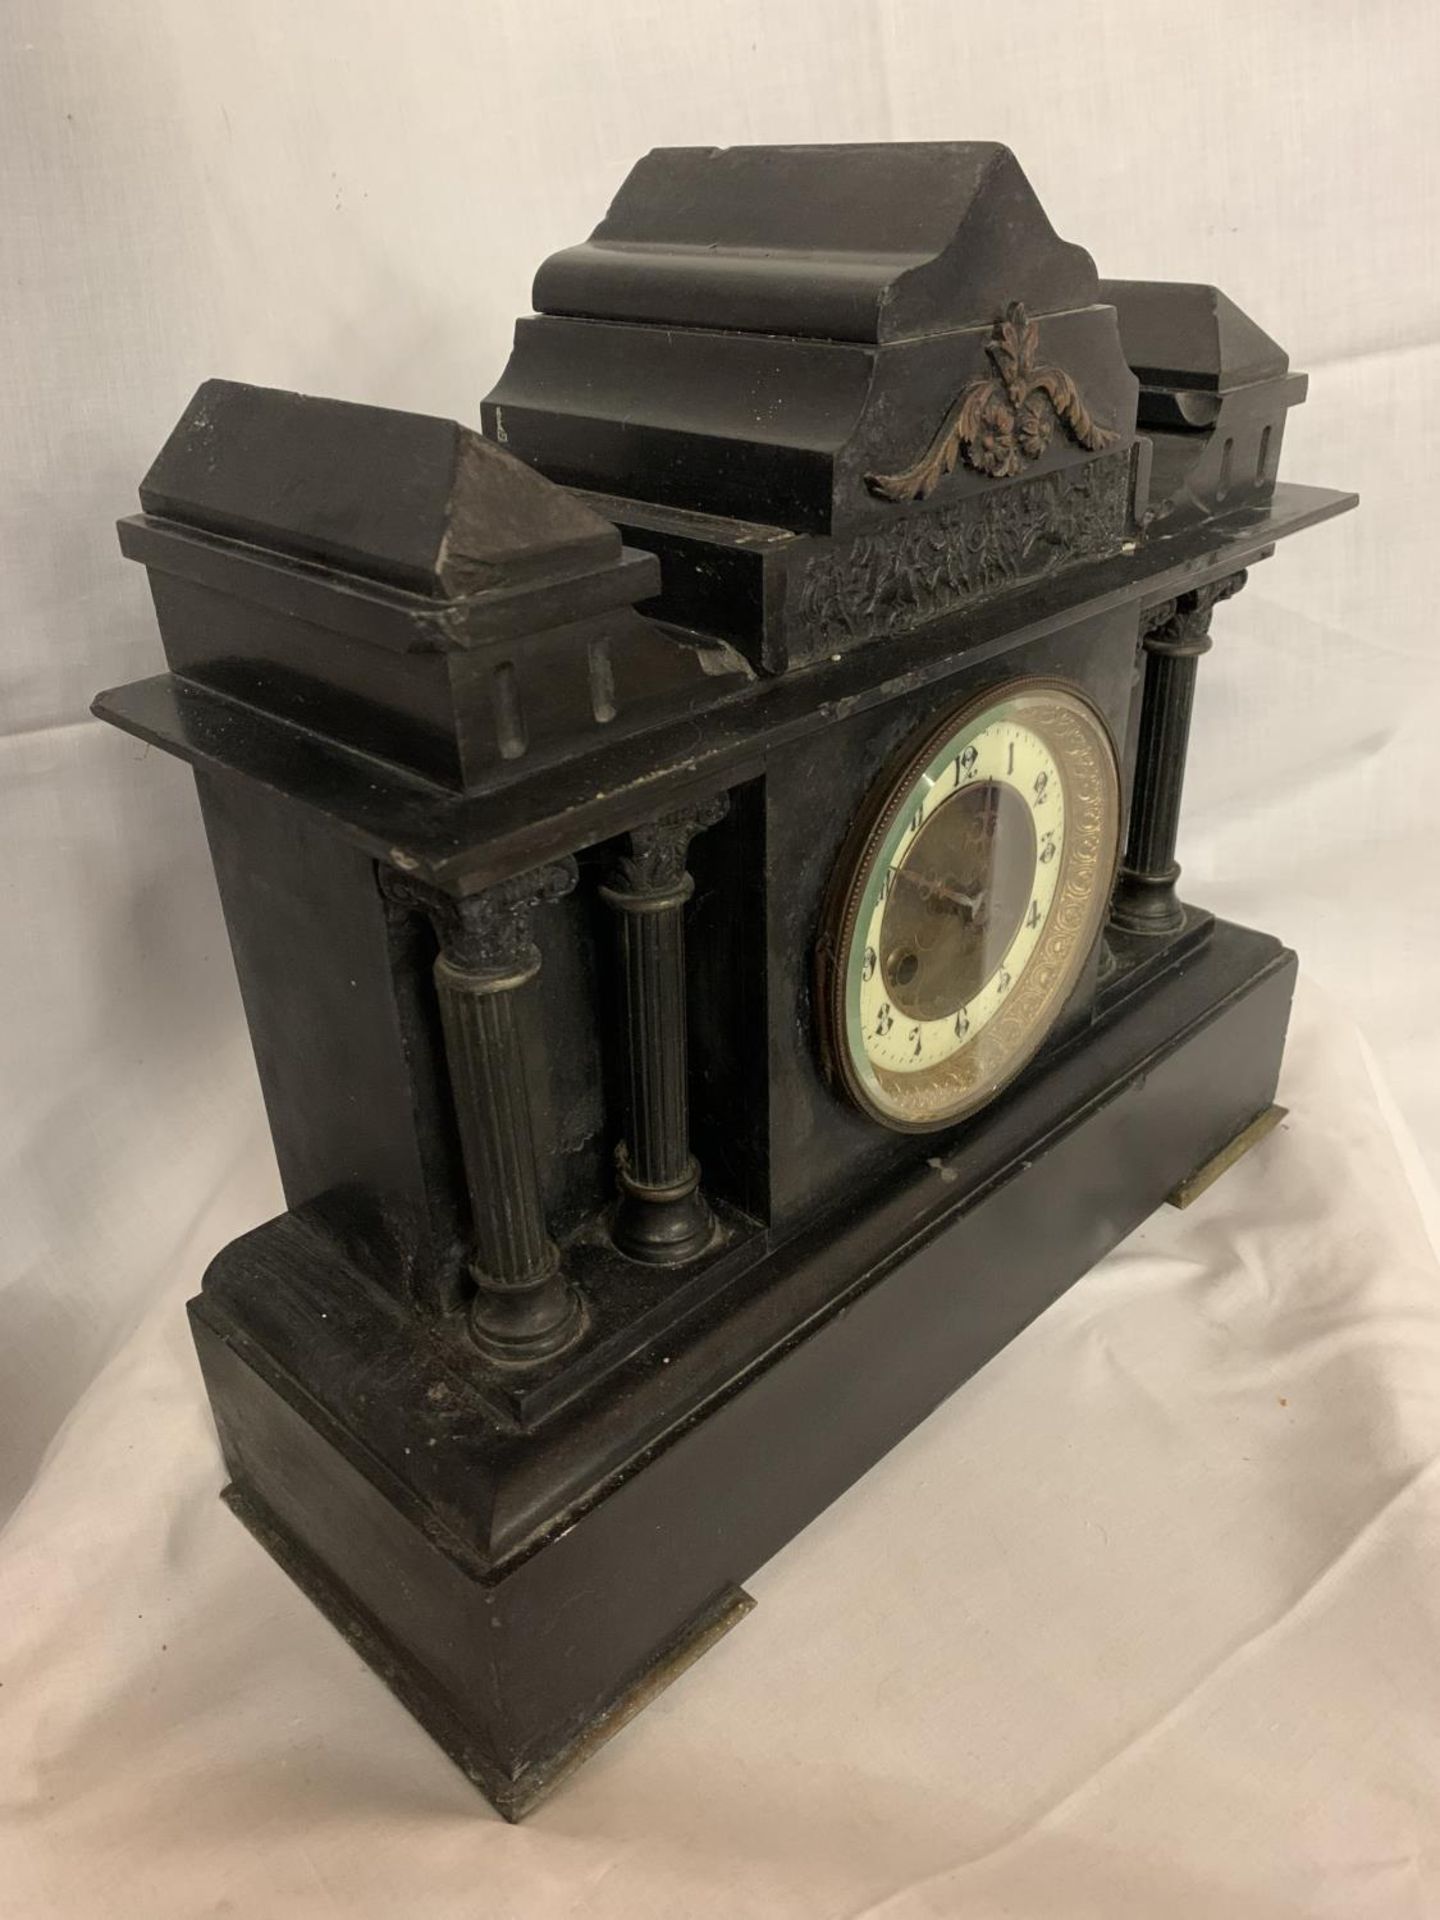 A LARGE SLATE MANTLE CLOCK WITH METAL COLUMNS - Image 2 of 4